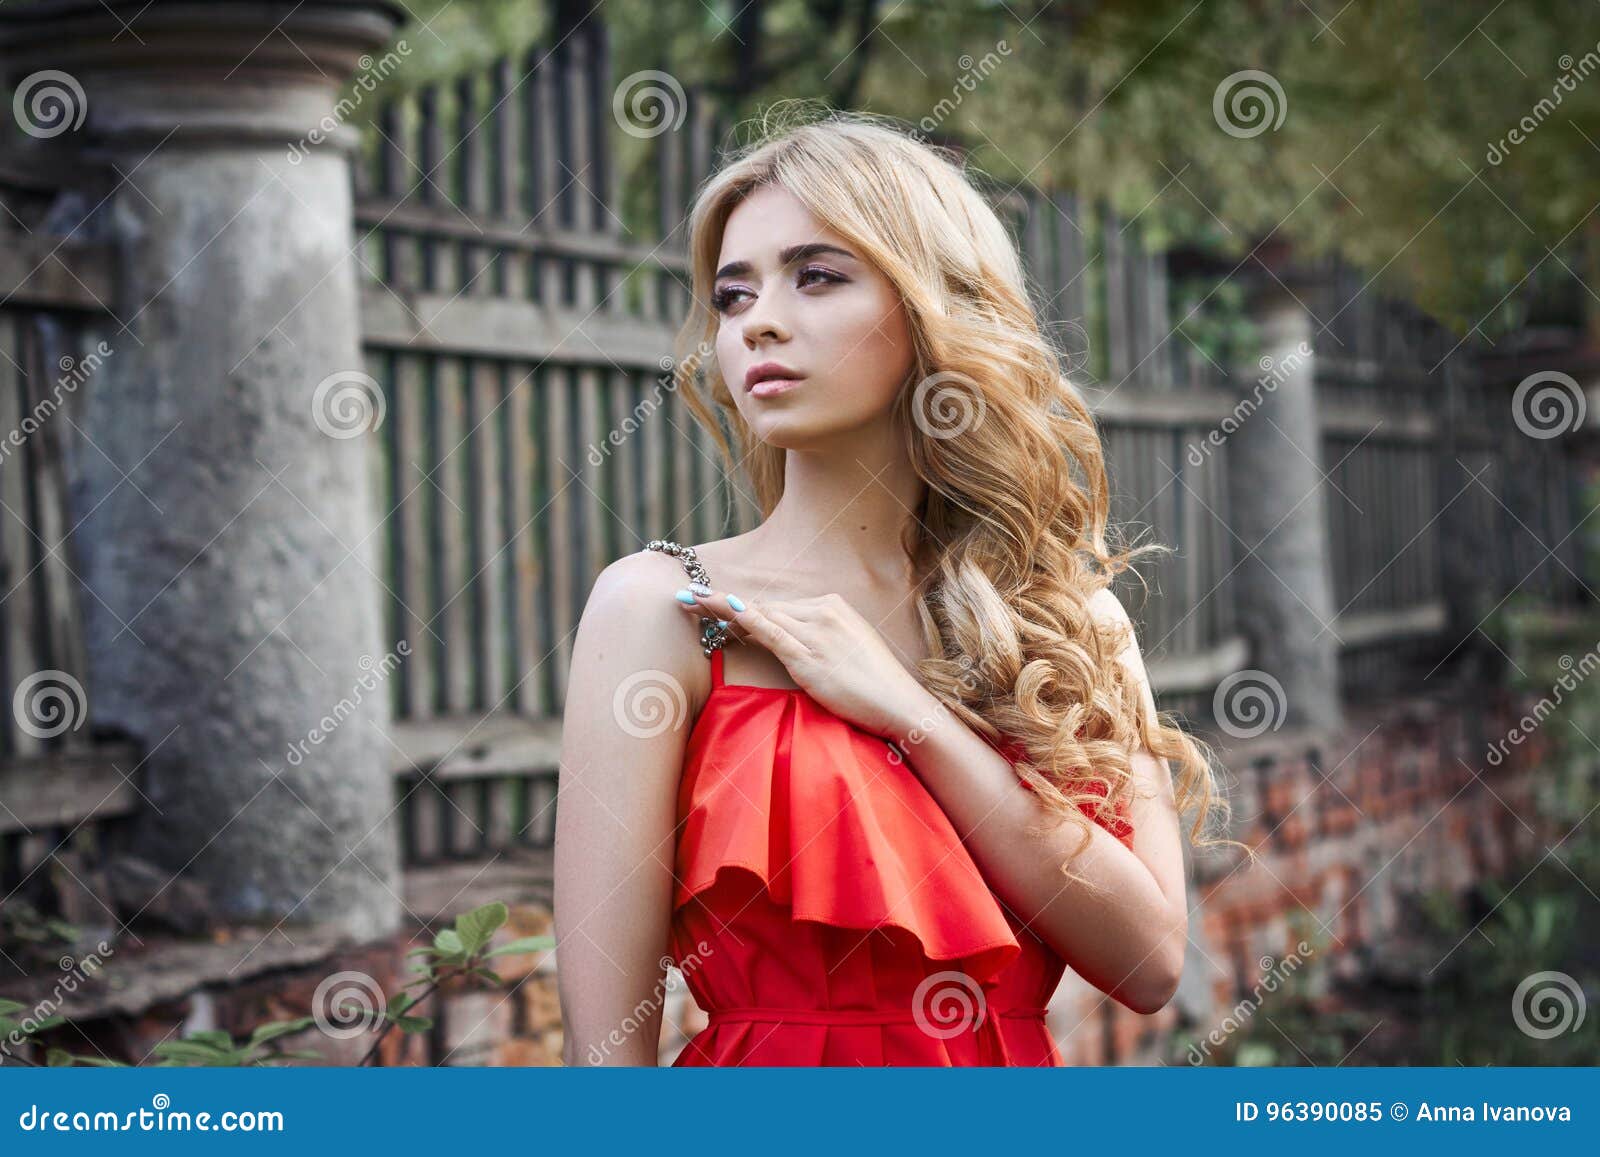 outdoor fashion beautiful young woman photo near old homestead summer. portrait girl blondes in red dress.